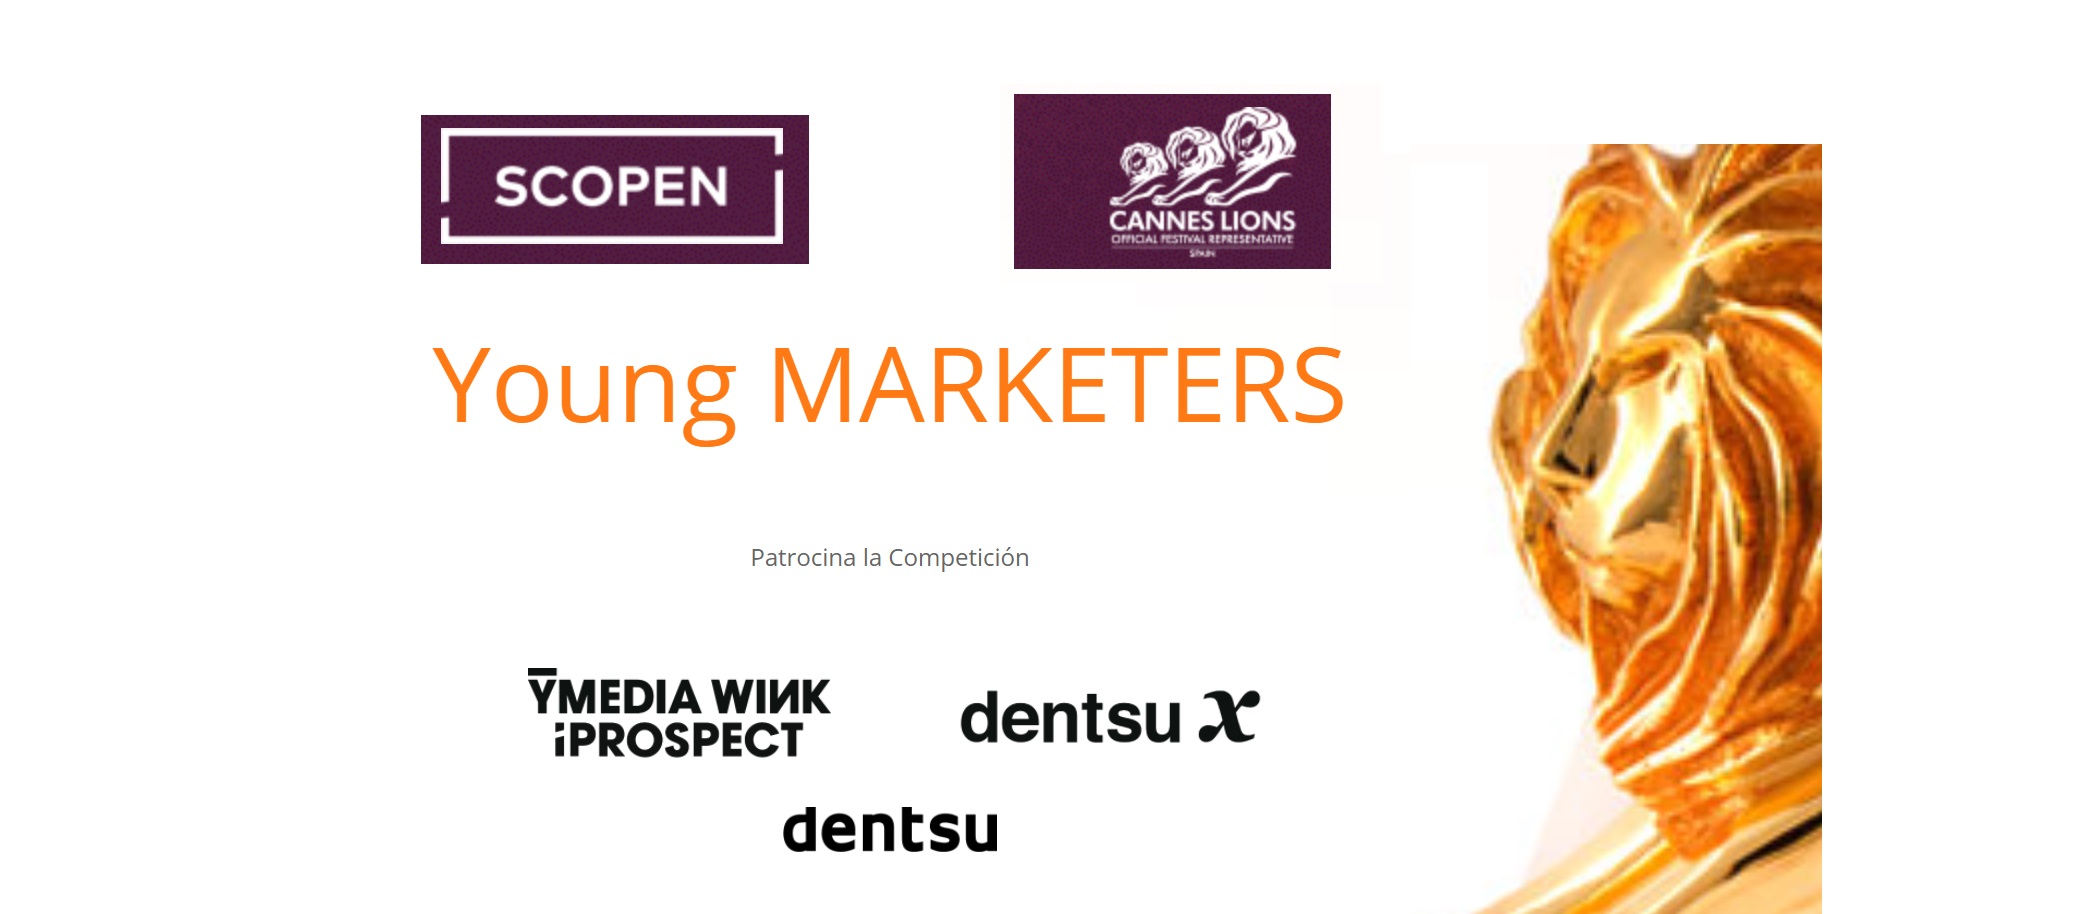 young marketers, 2021, ymedia , iprospect, dentsux, cannes lions, scopen, programapublicidad